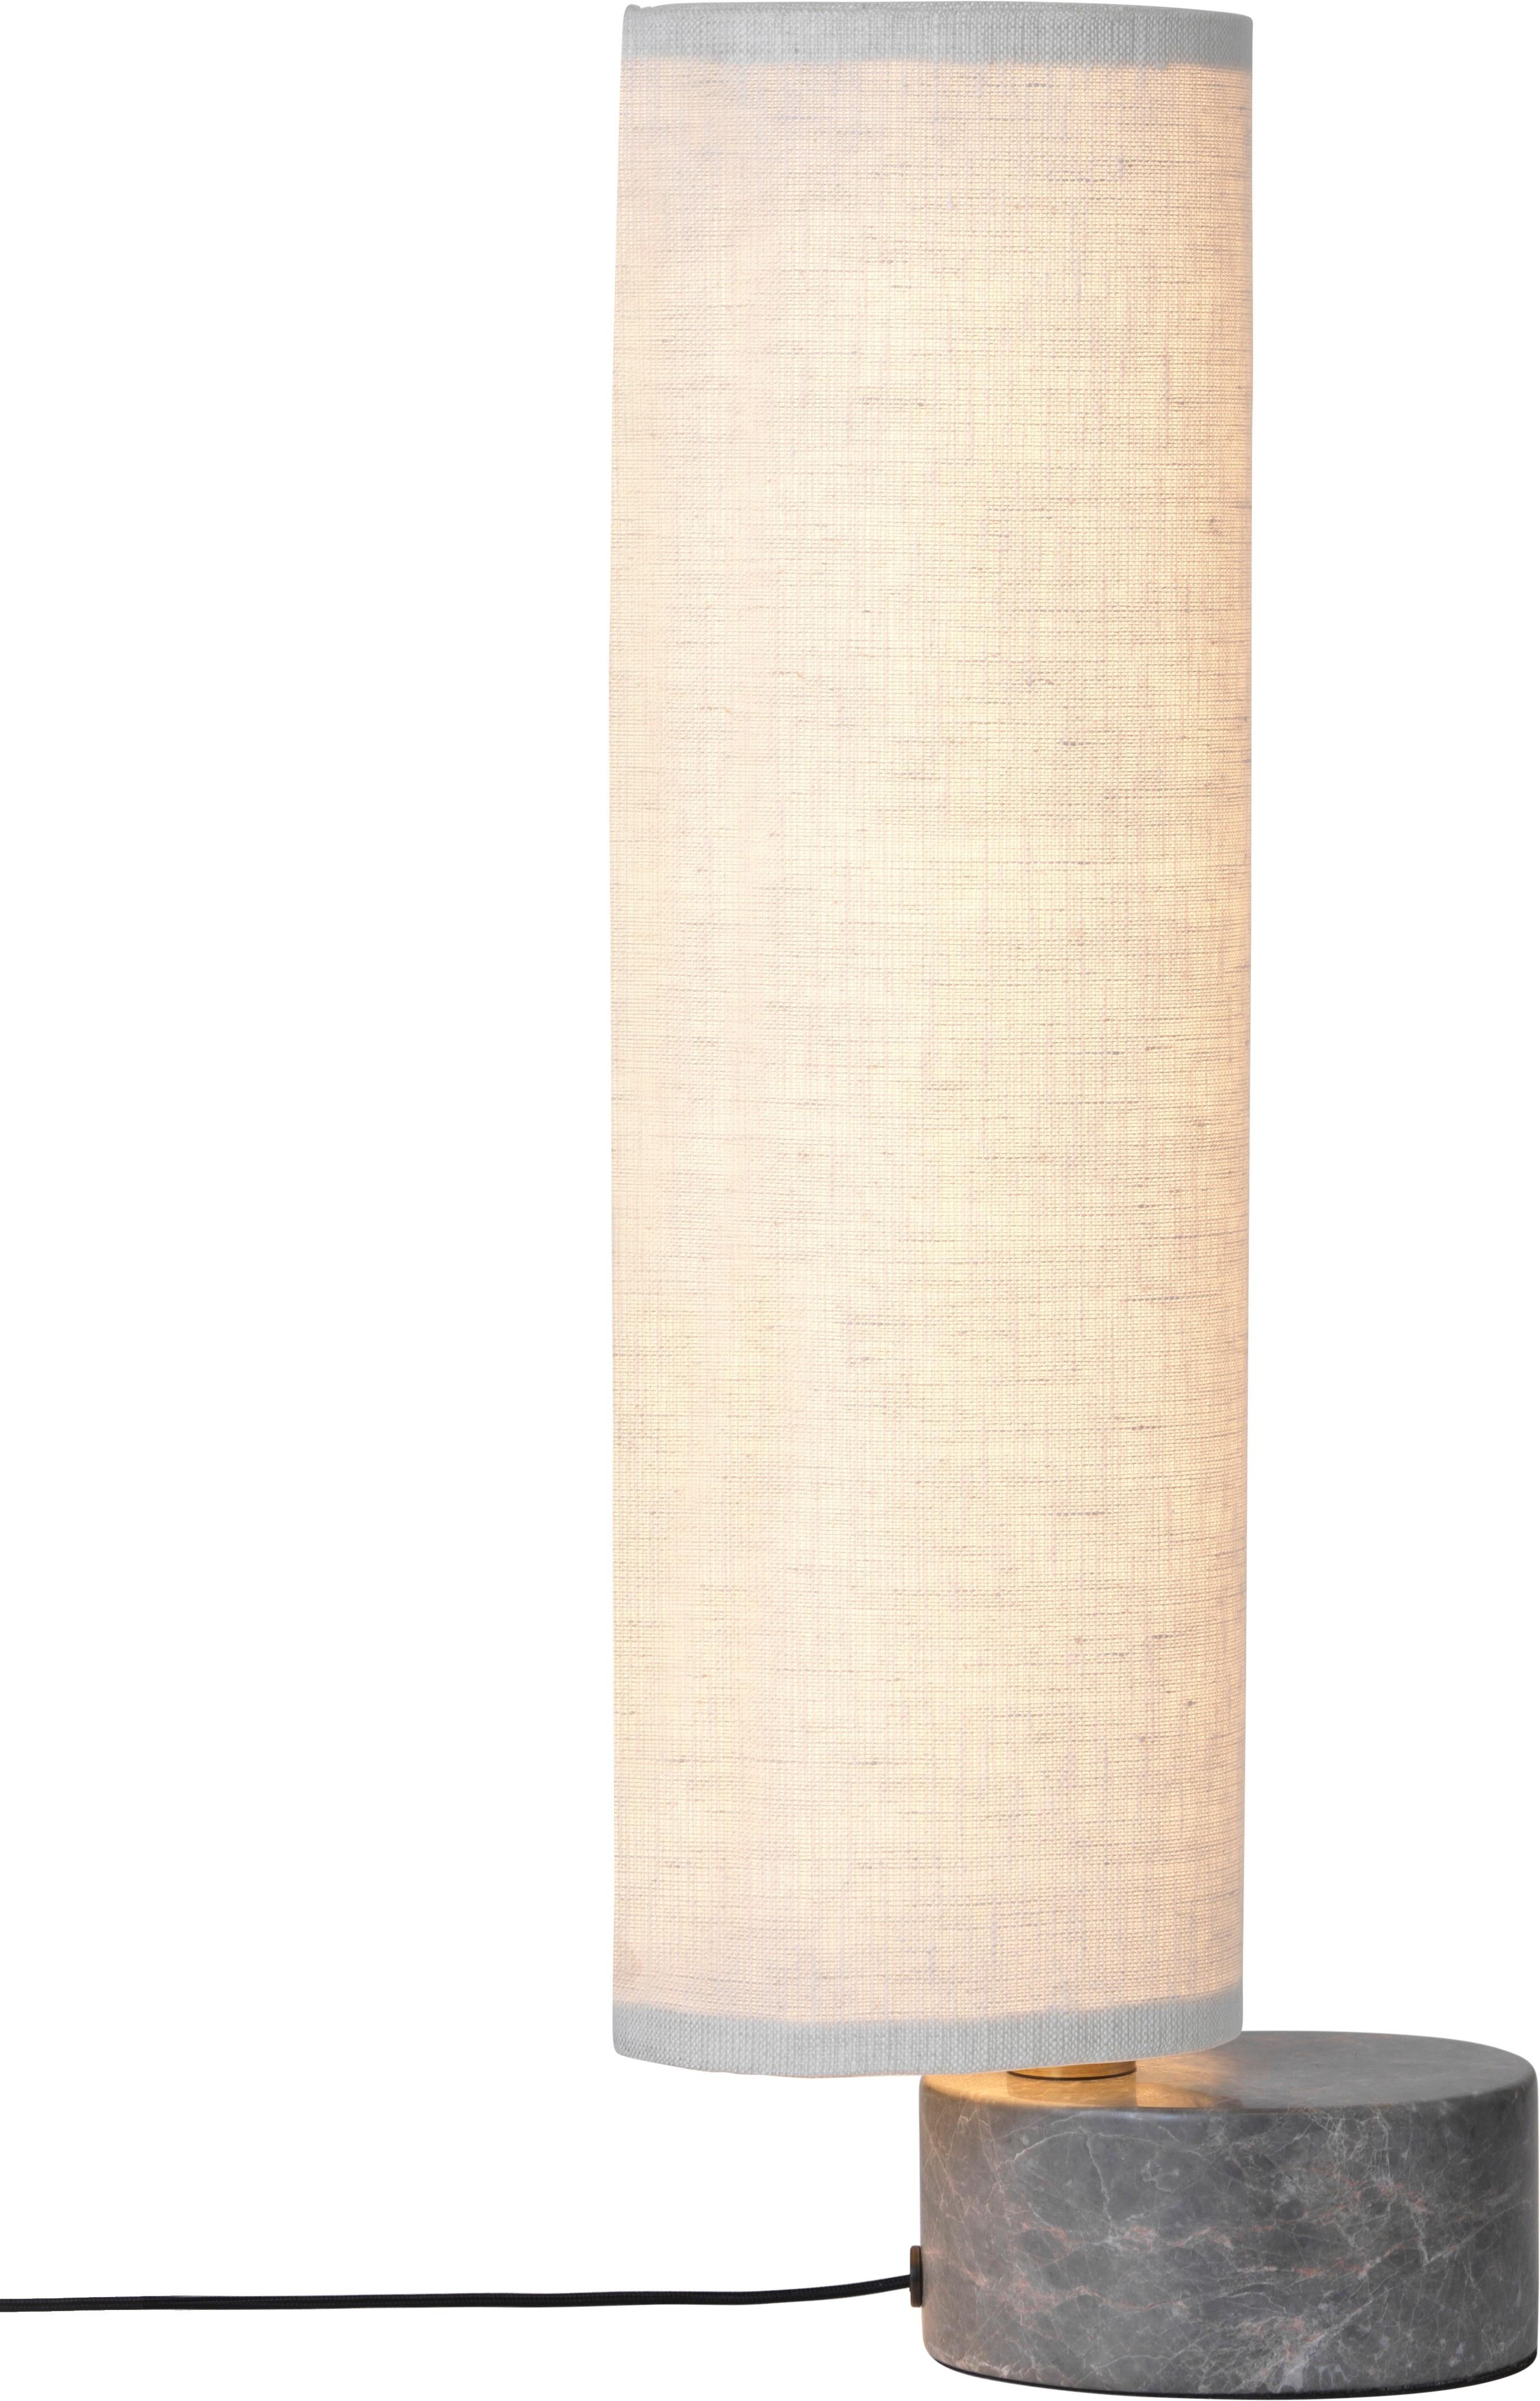 'Unbound' Table Lamp by Space Copenhagen for GUBI with Natural Canvas Shade For Sale 5